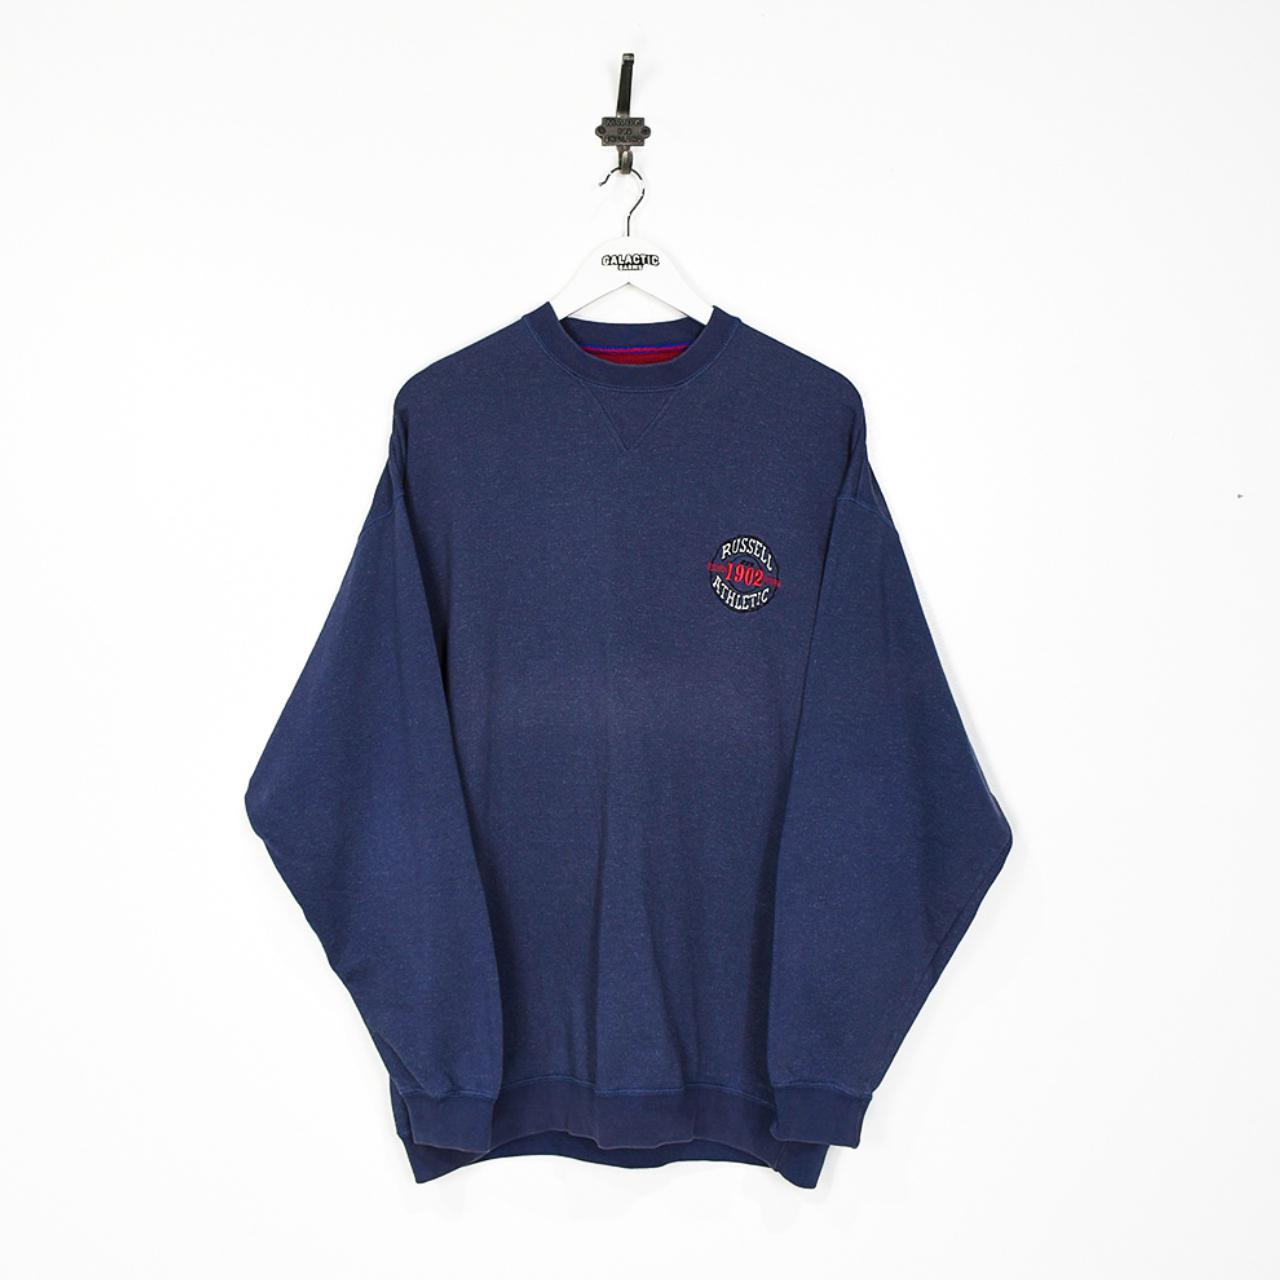 Product Image 1 - Russell Athletic Sweatshirt

Condition:  Very